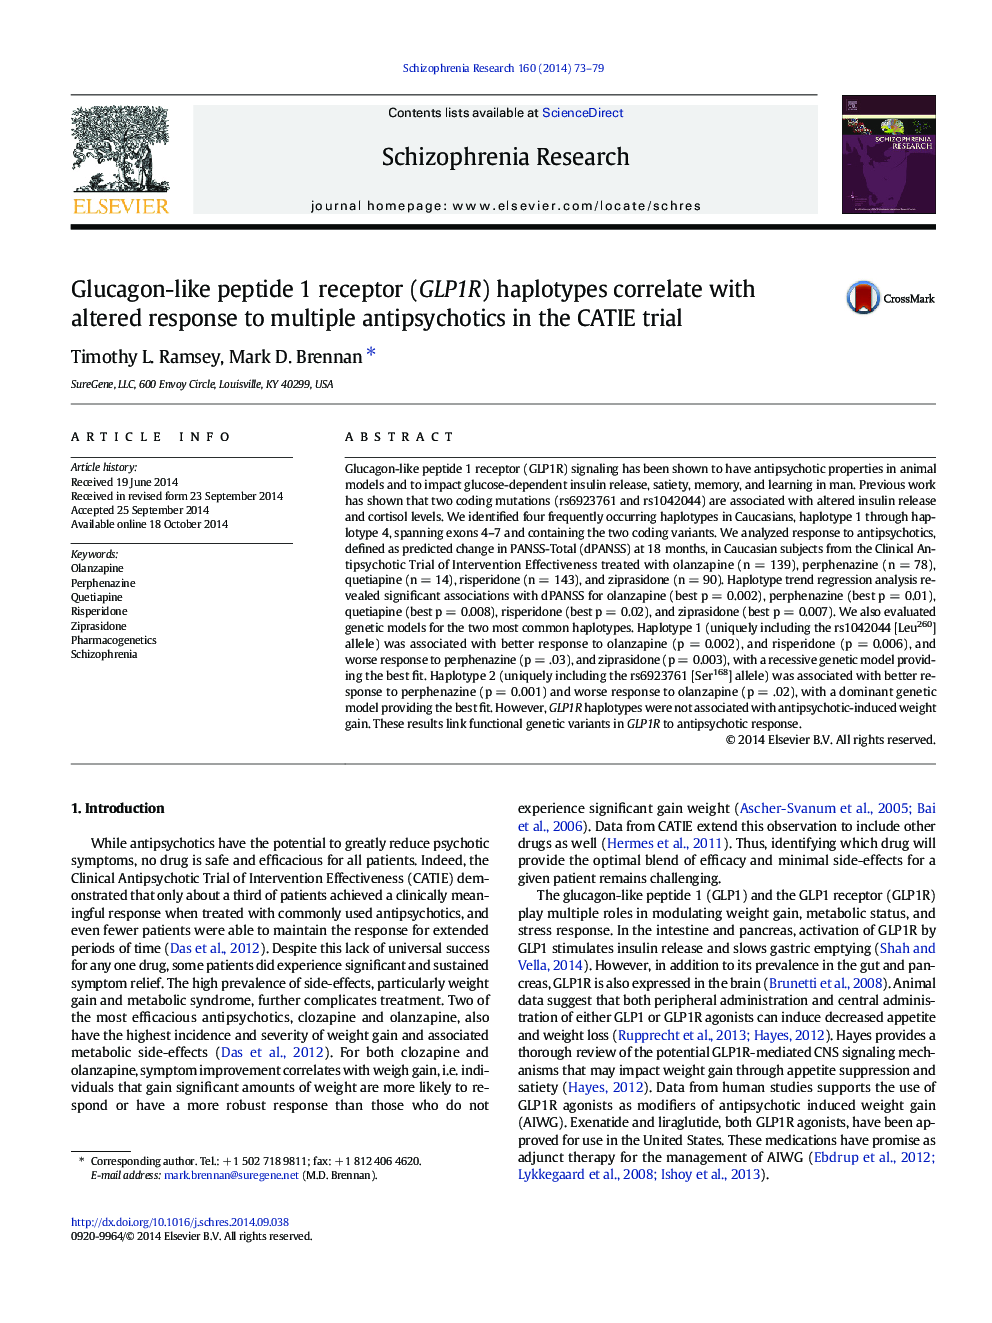 Glucagon-like peptide 1 receptor (GLP1R) haplotypes correlate with altered response to multiple antipsychotics in the CATIE trial